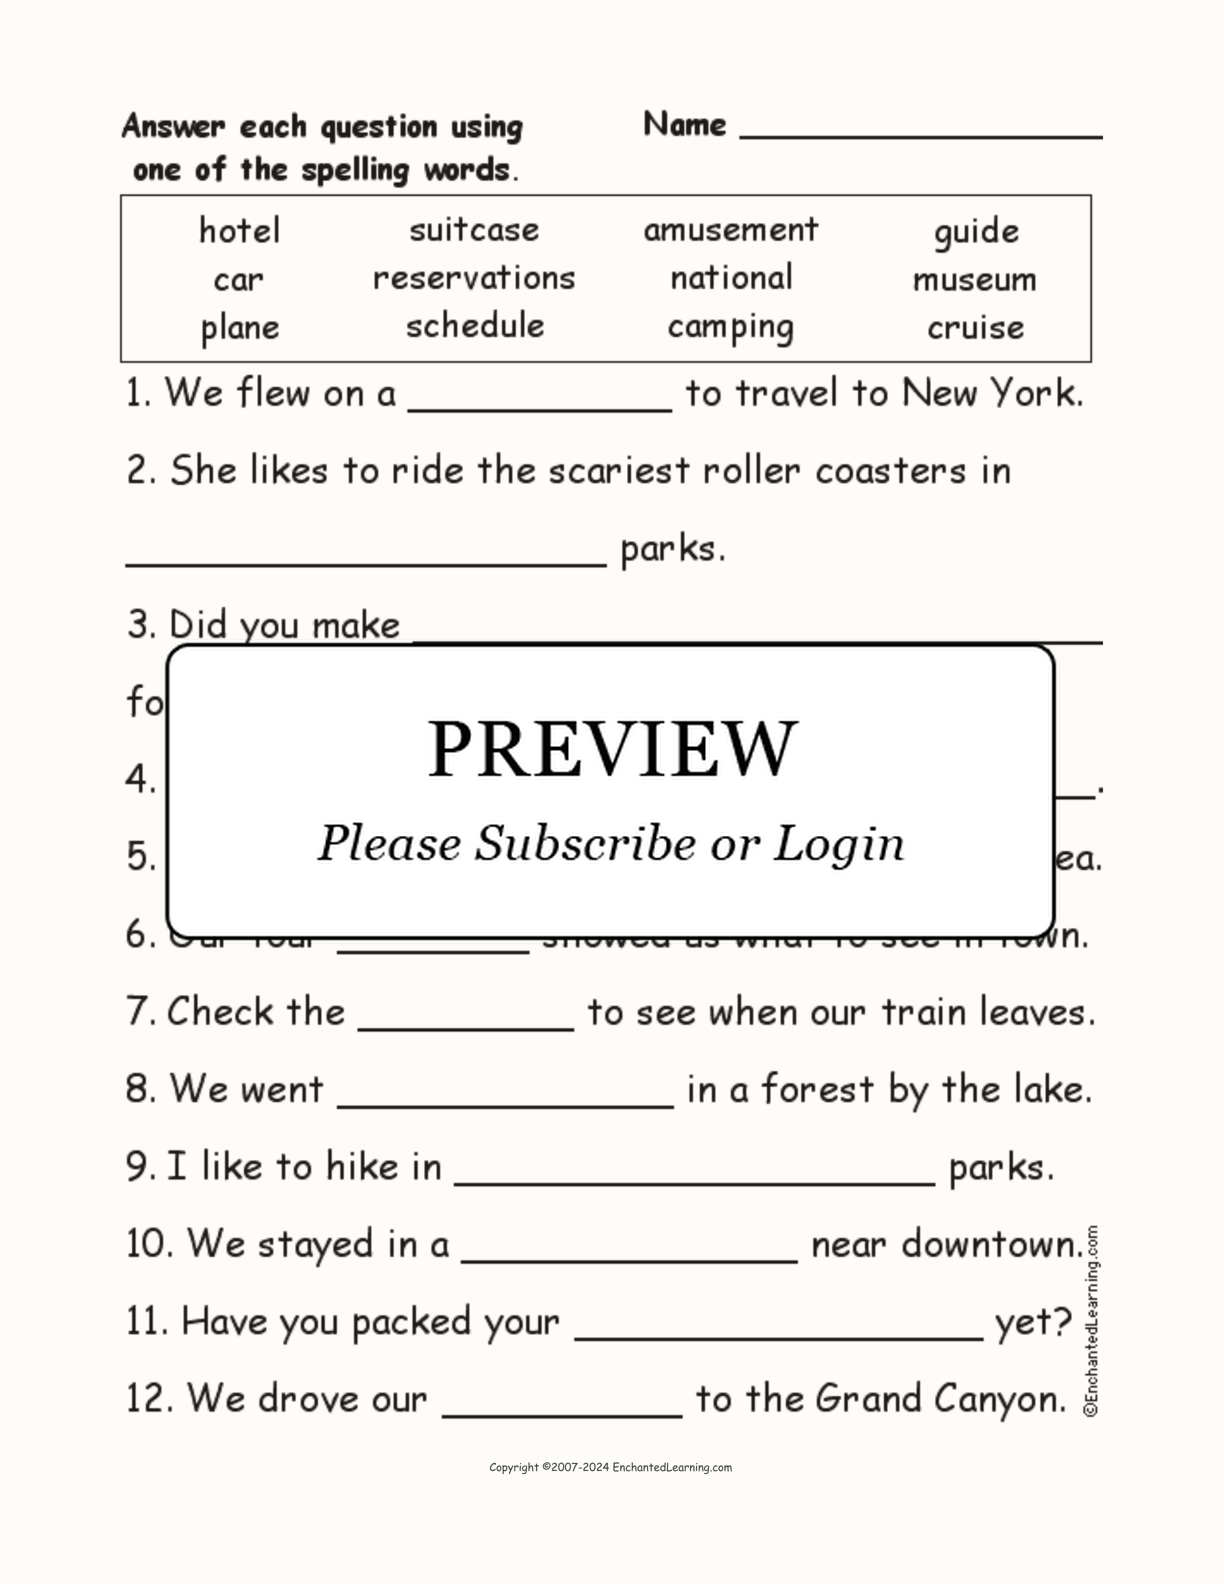 Vacation Spelling Word Questions interactive worksheet page 1